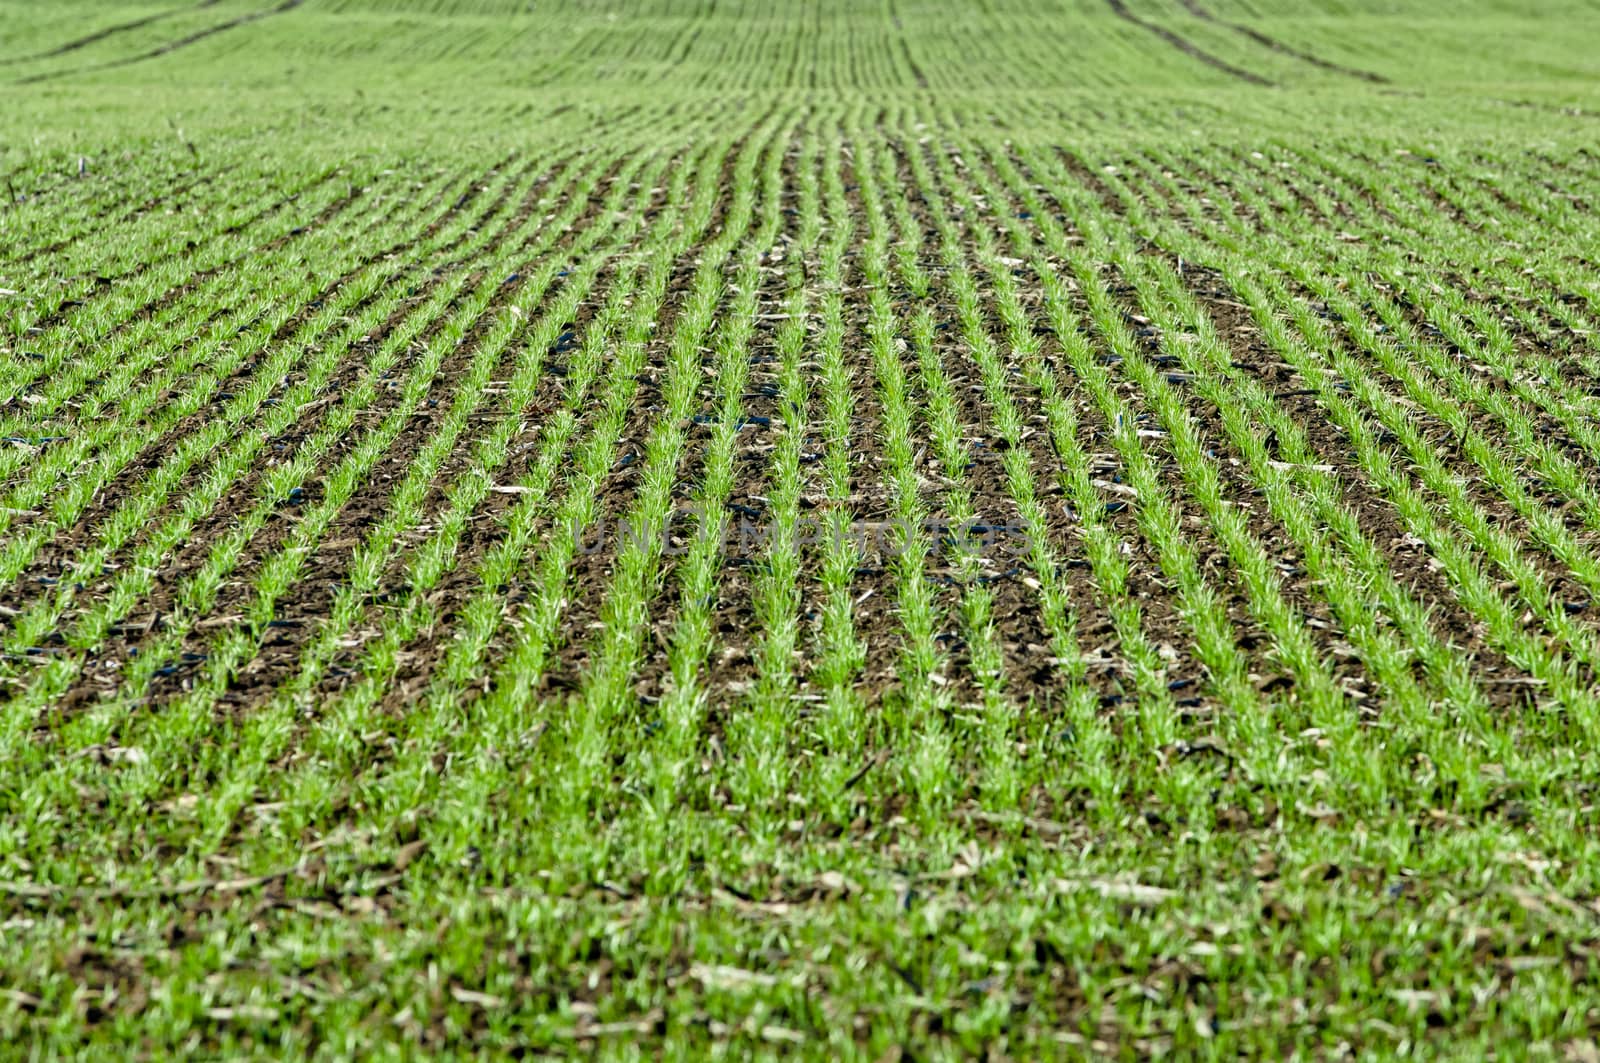 Crop of young seedlings in an agricultural field in spring by horizonphoto